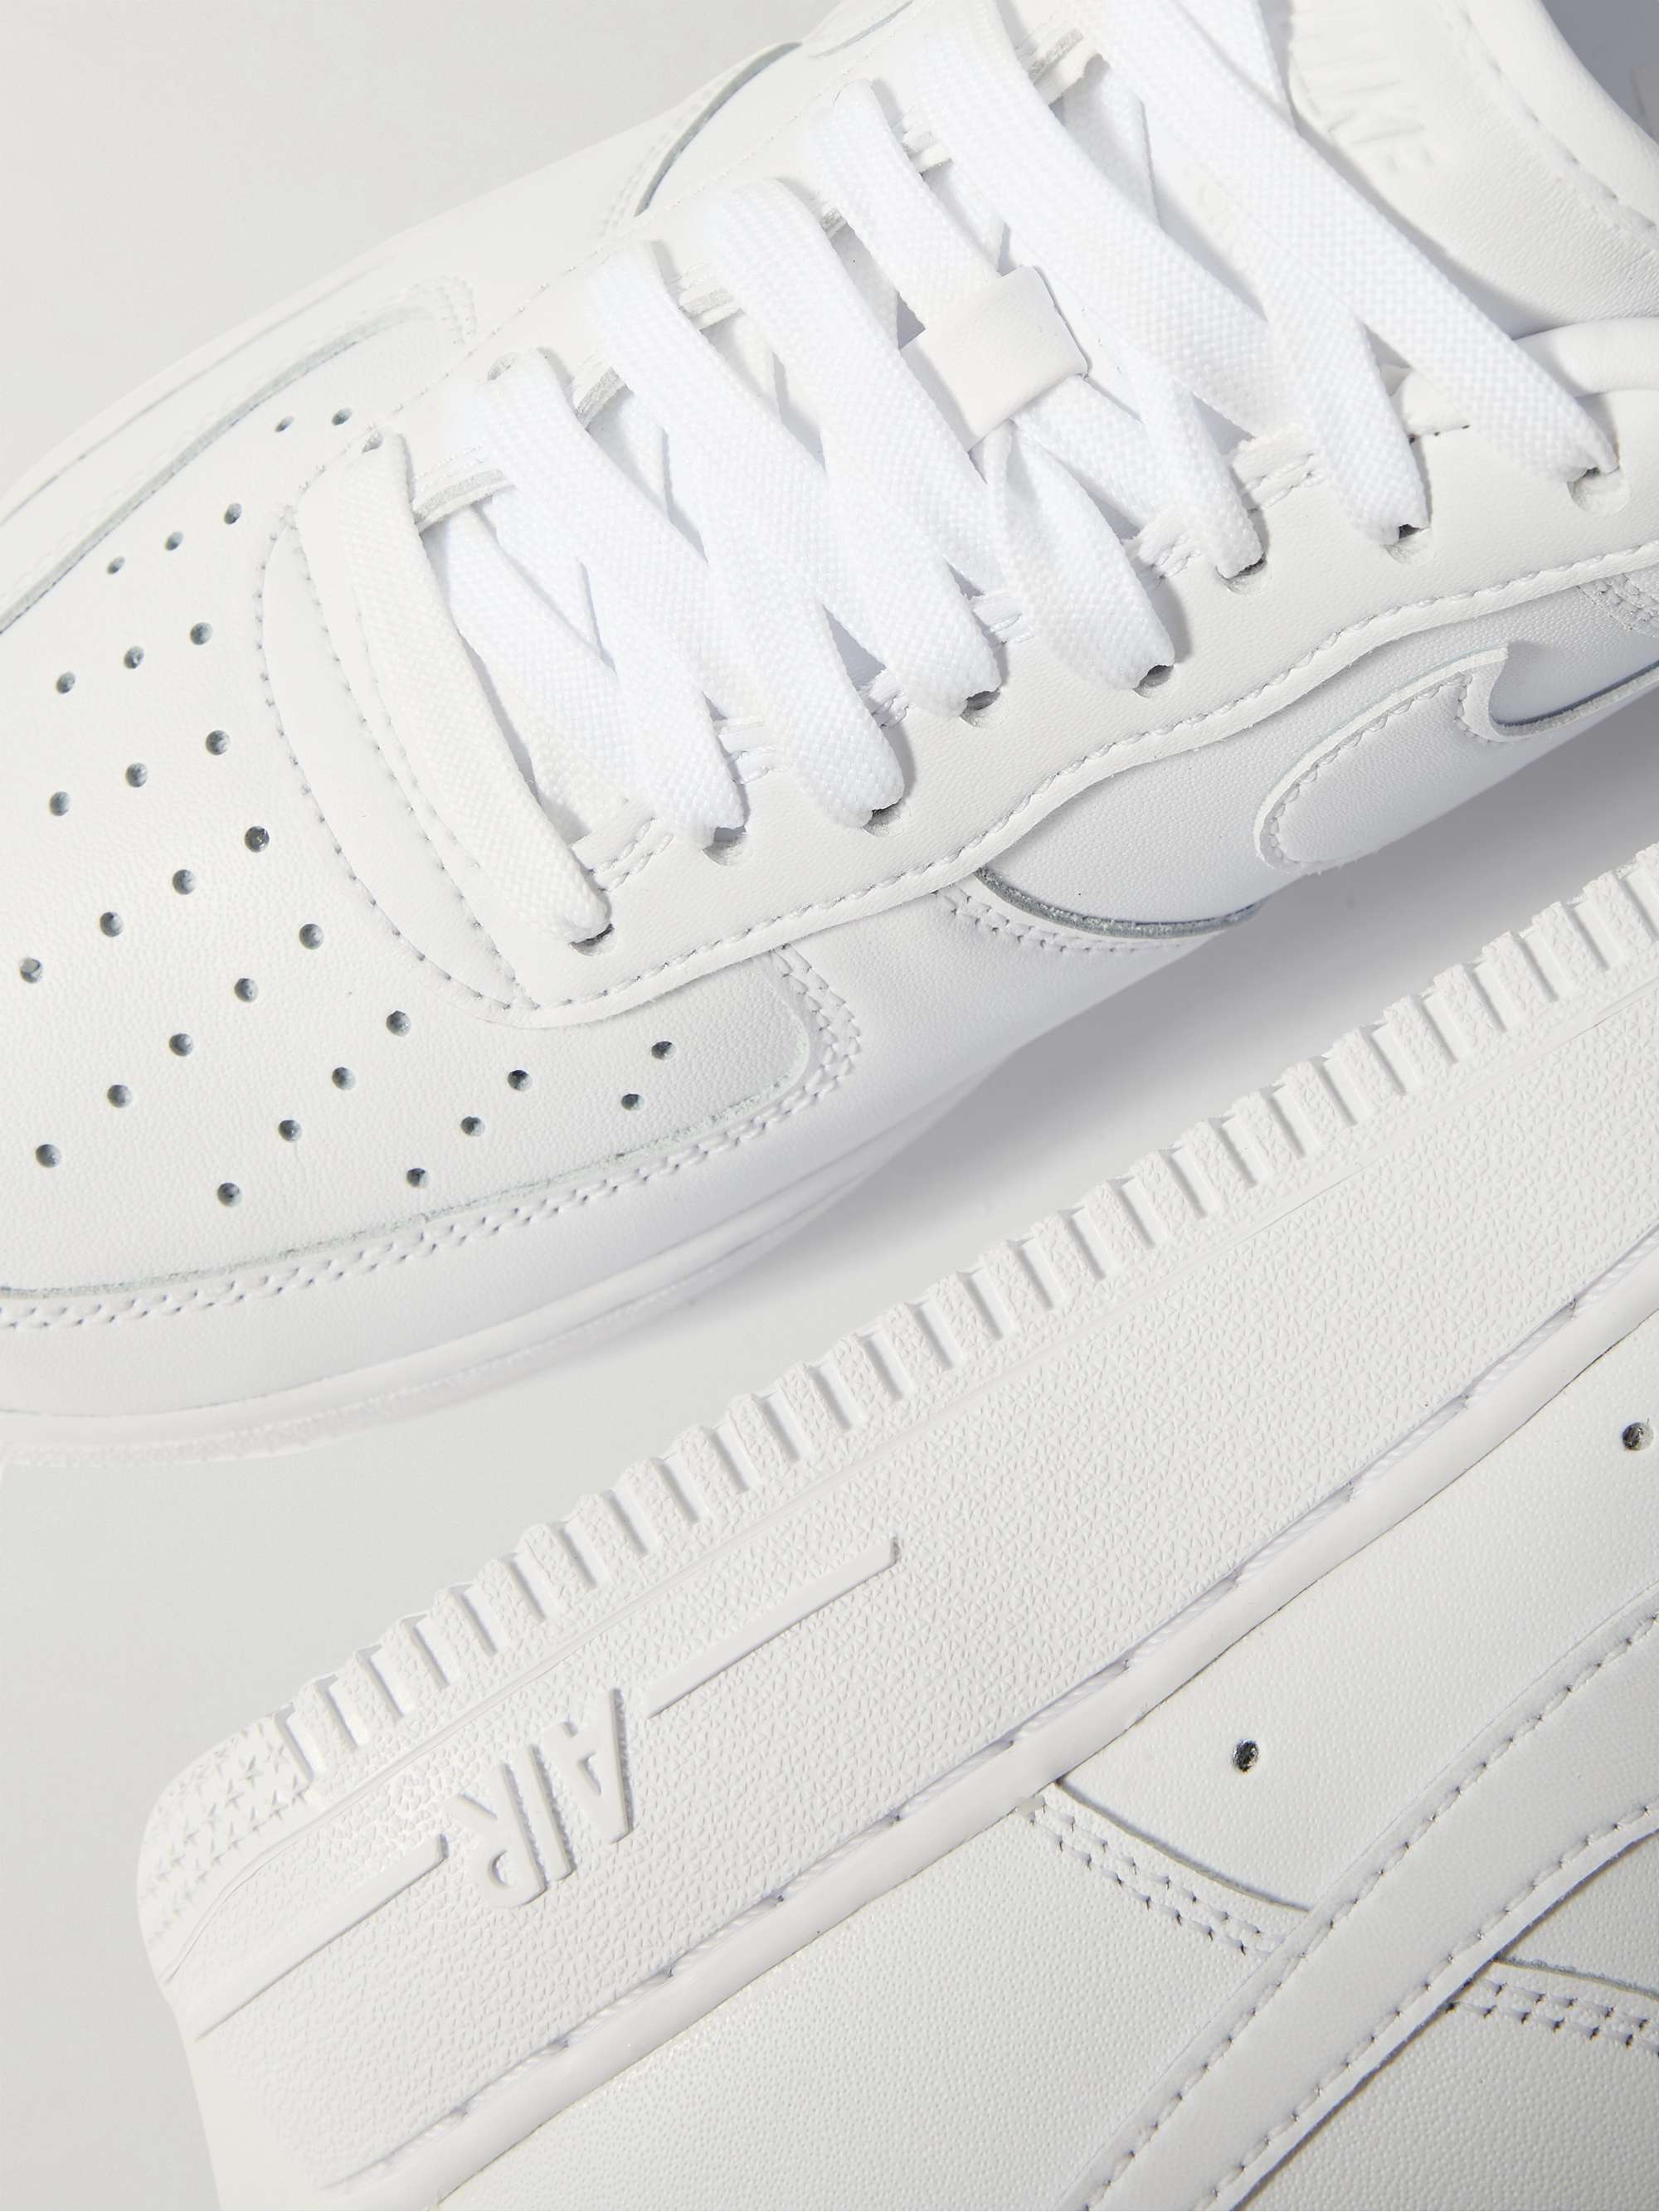 NIKE Air Force 1 '07 Fresh Leather Sneakers